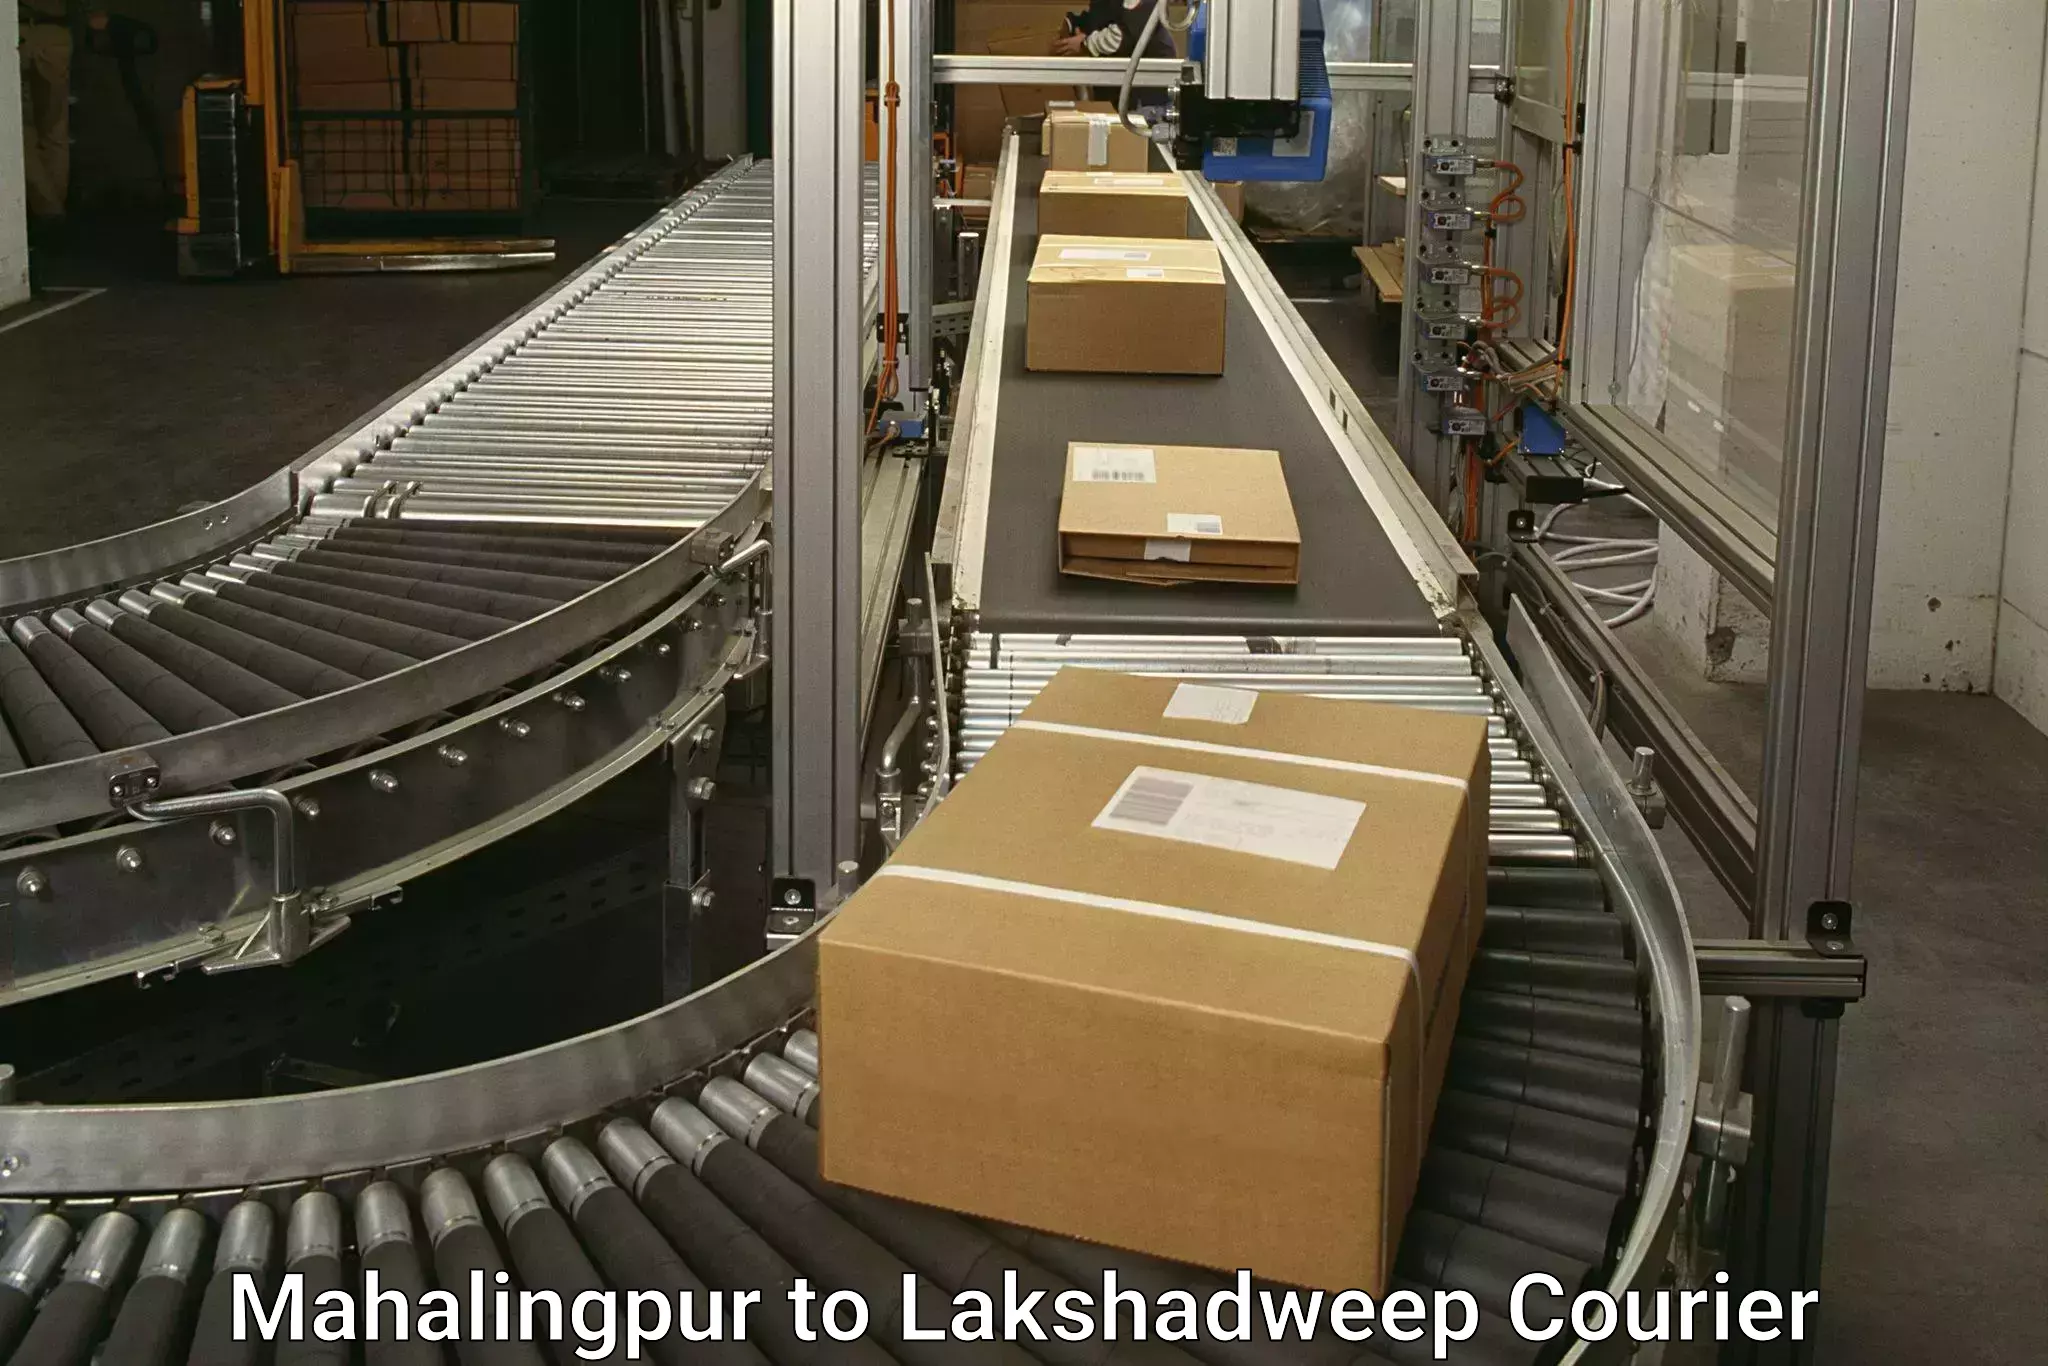 Enhanced tracking features in Mahalingpur to Lakshadweep